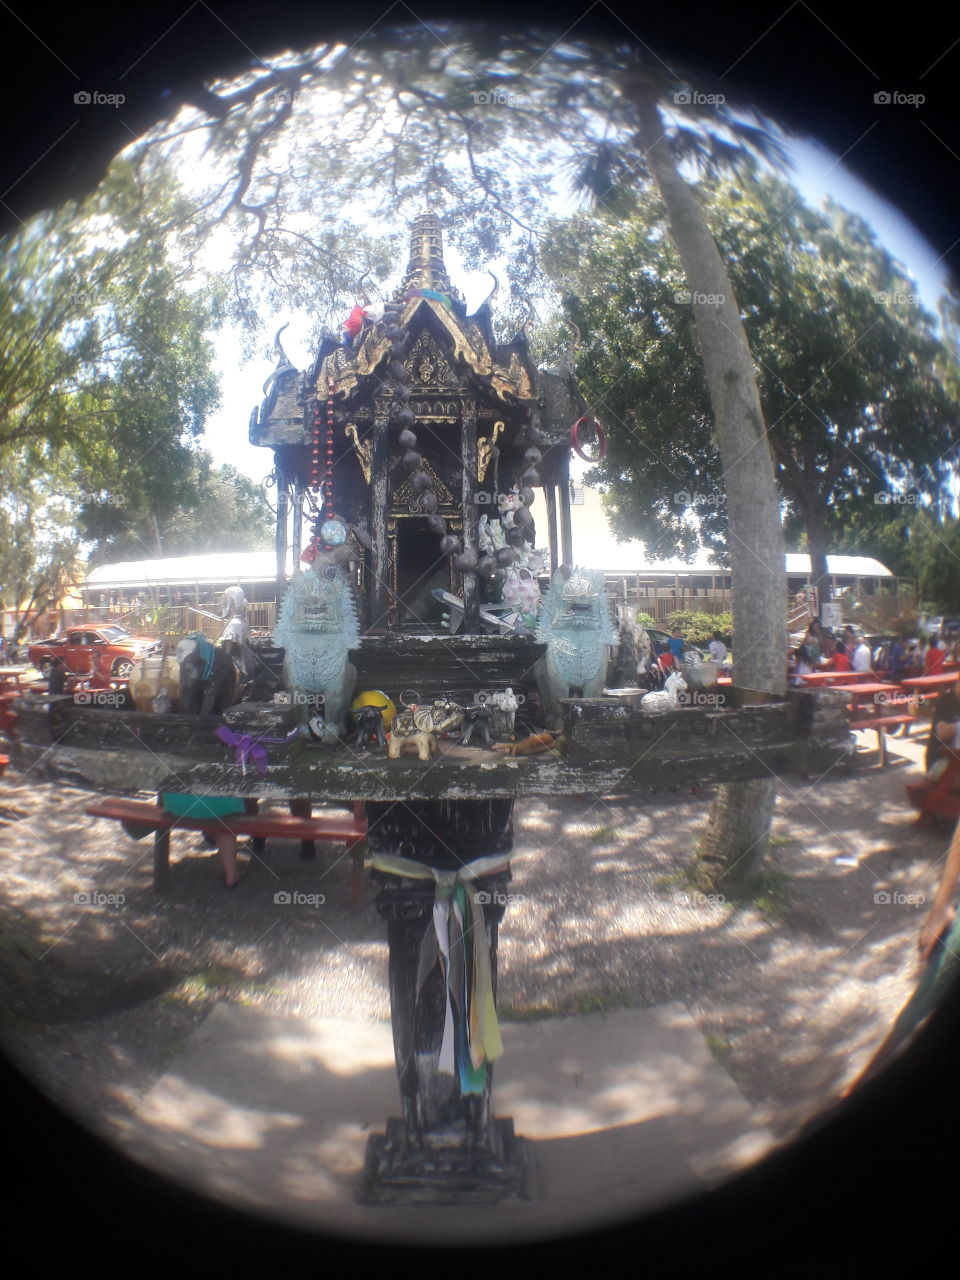 temple offerings at Thai temple in South Tampa